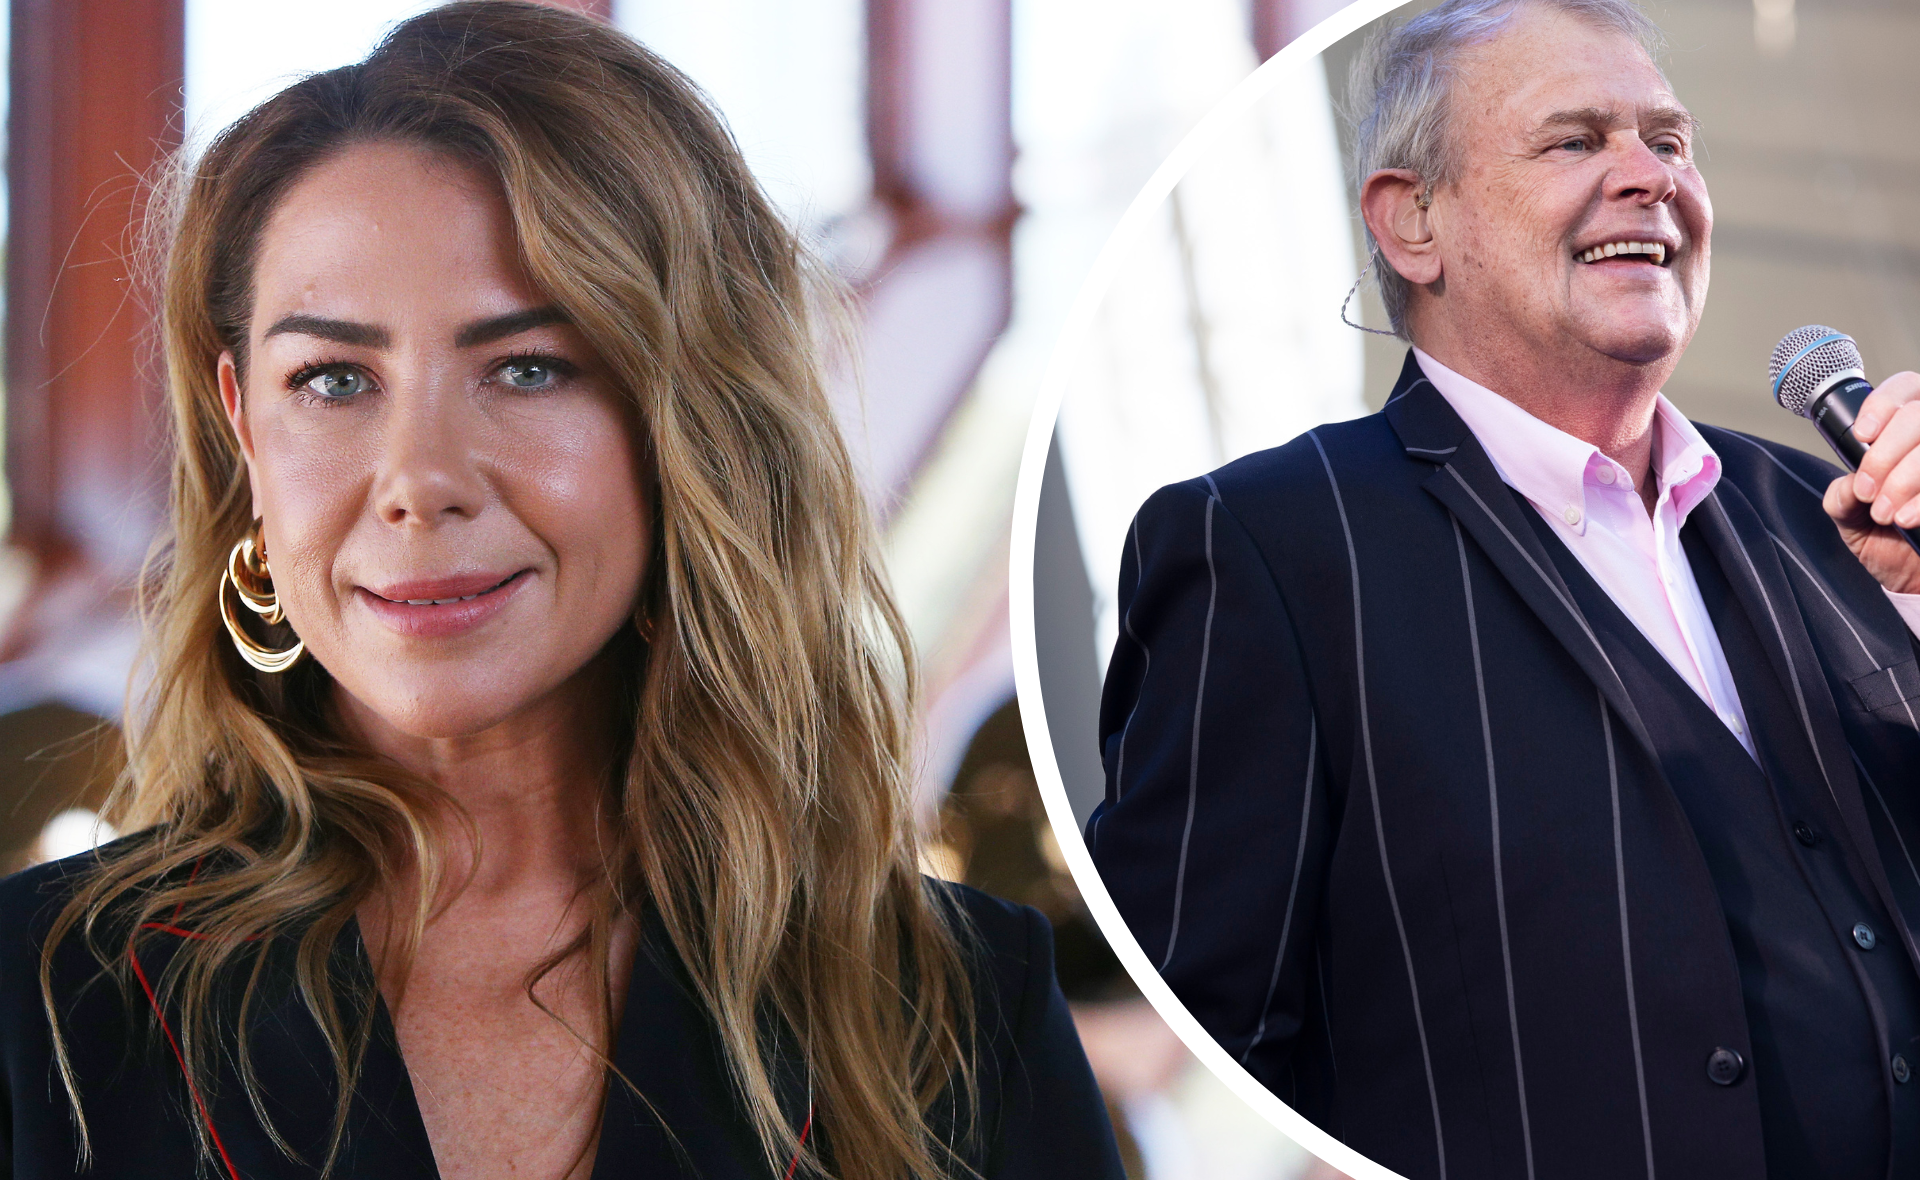 Former Home and Away star Kate Ritchie reflects on her “special relationship” with John Farnham